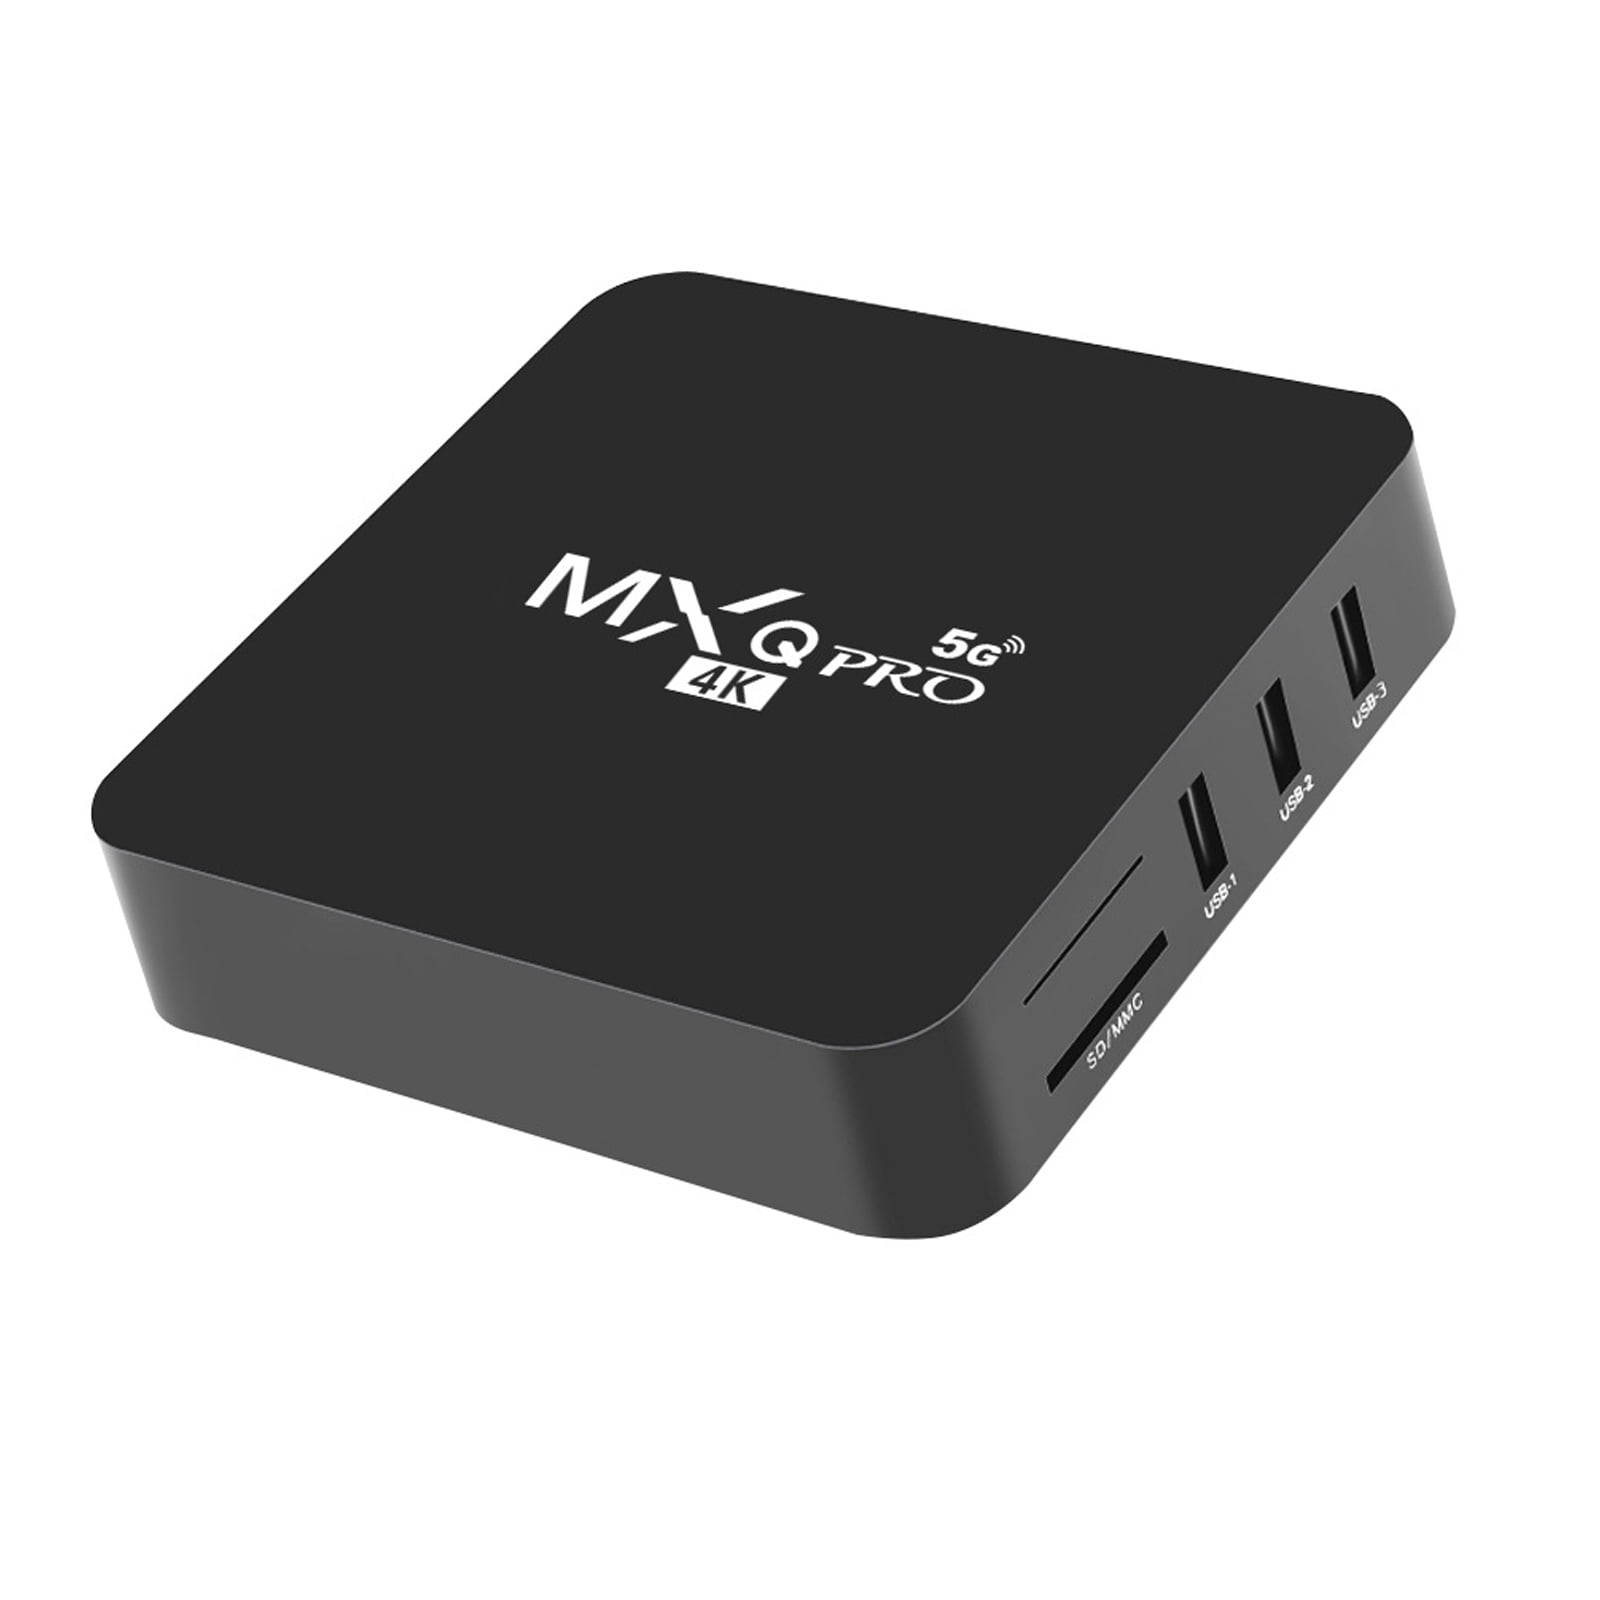 NEW Review SMART TV BOX (MXQ PRO 5G 4K)8GB RAM, ROM 128GB Android